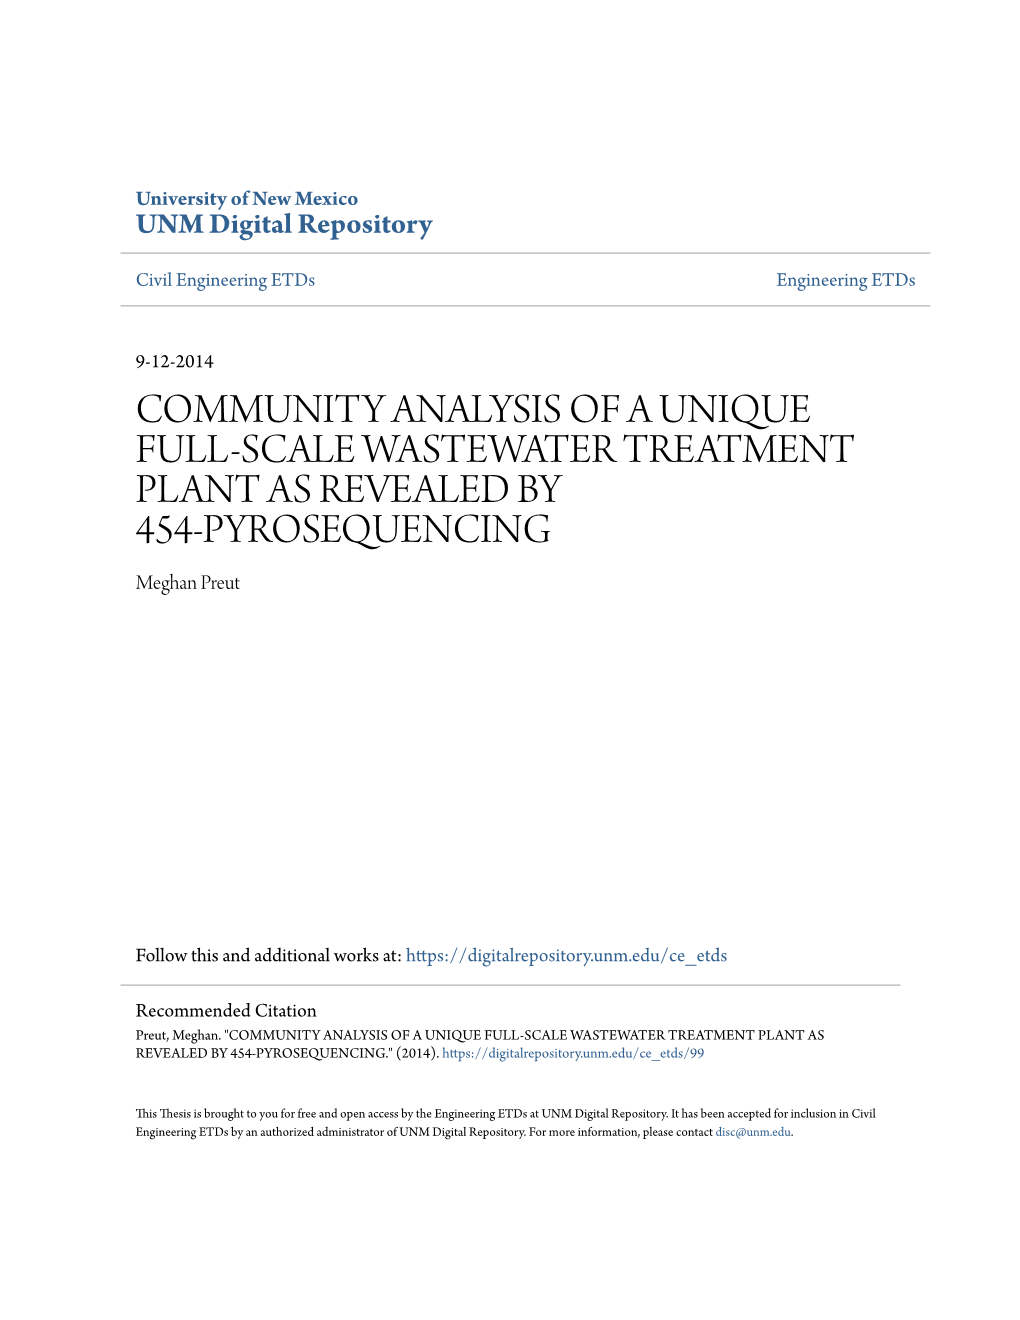 COMMUNITY ANALYSIS of a UNIQUE FULL-SCALE WASTEWATER TREATMENT PLANT AS REVEALED by 454-PYROSEQUENCING Meghan Preut